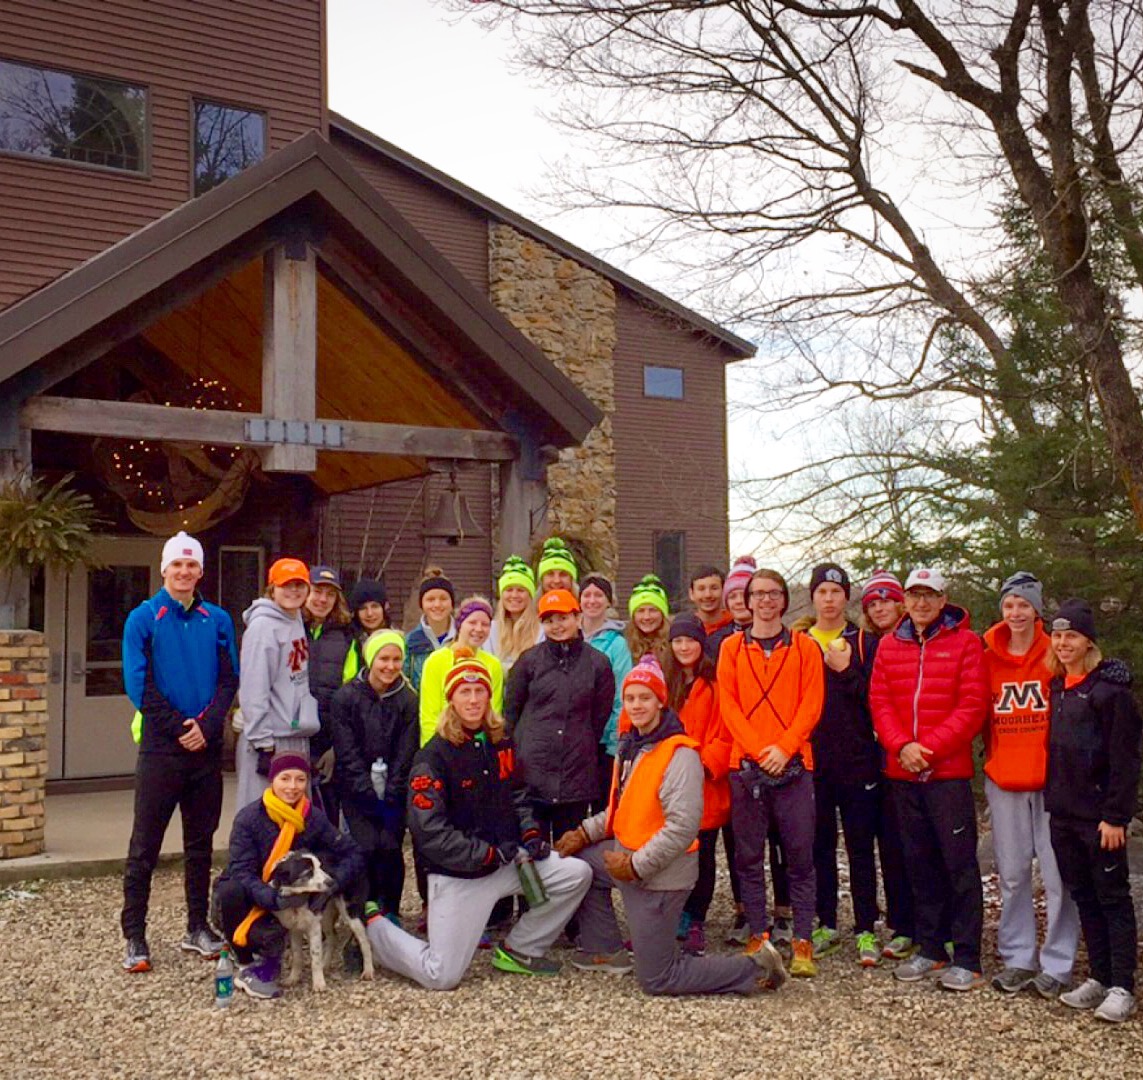 Newly formed Moorhead Nordic Ski team ready for a morning of clearing on the trails. November 14th, 2015.